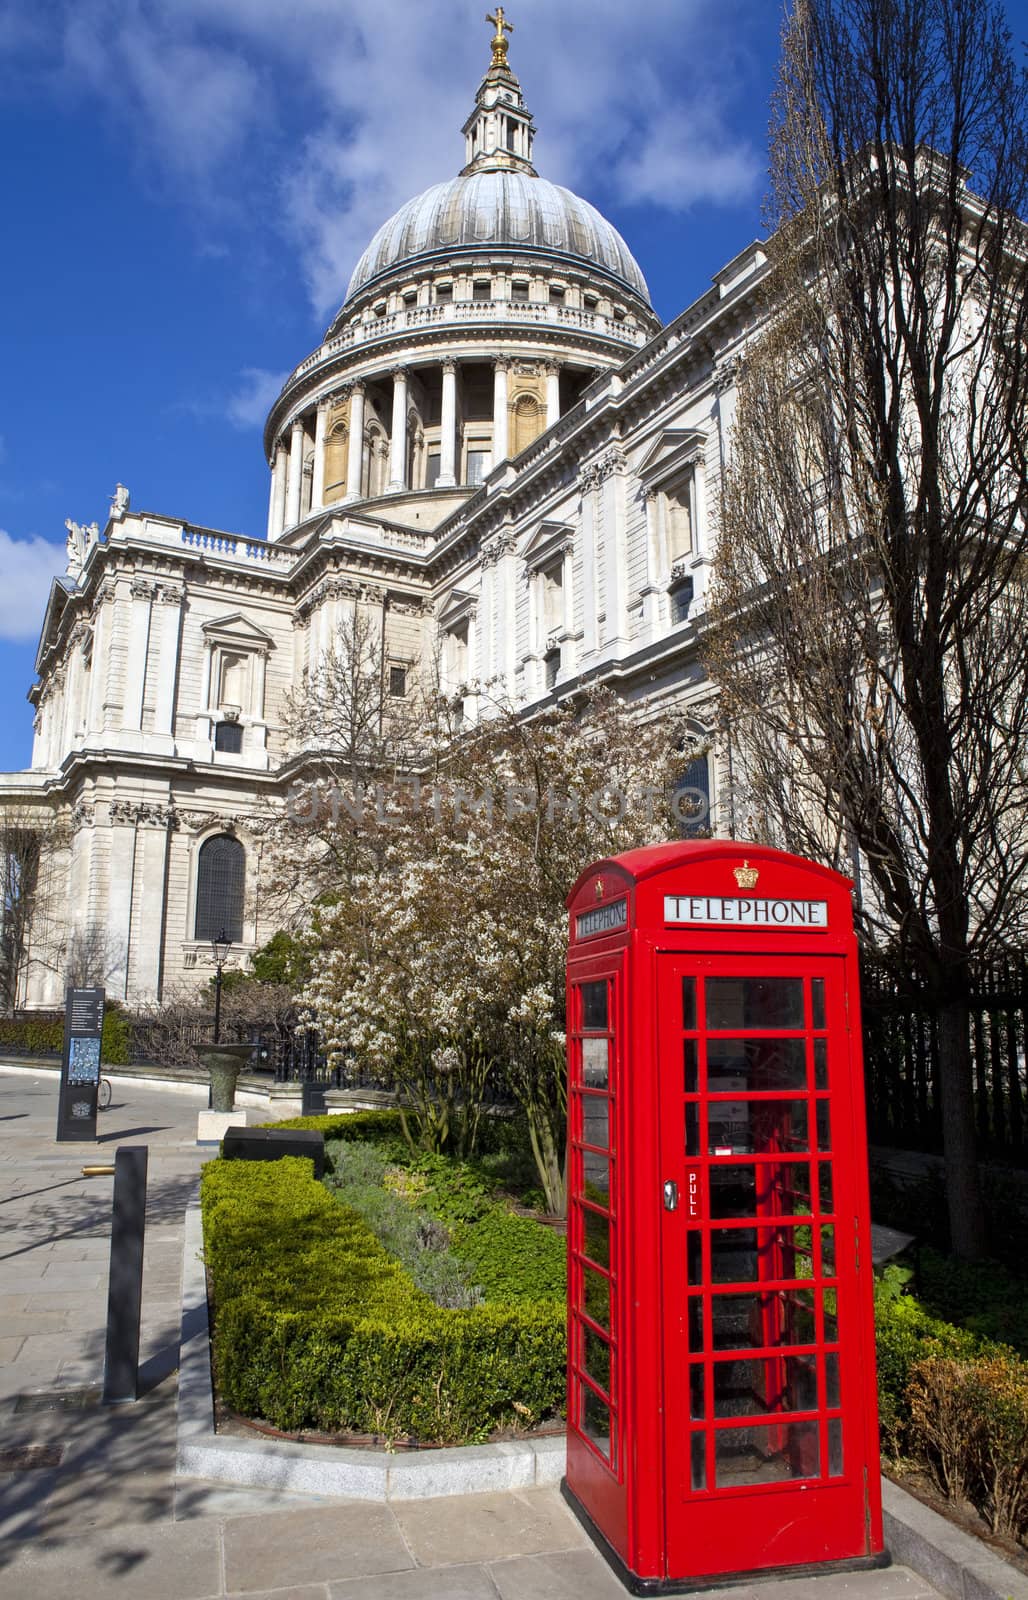 St. Paul's Cathedral and Red Telephone Box in London.